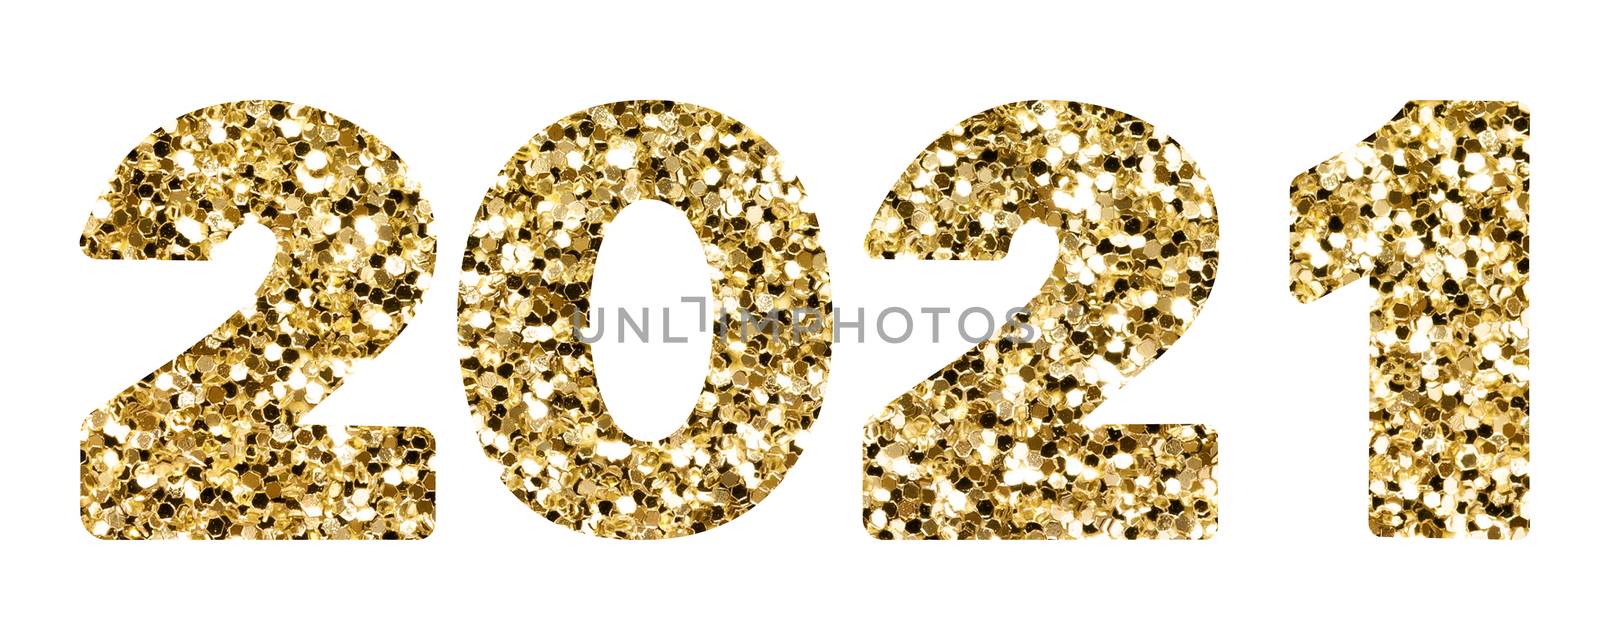 2021 gold shimemr texture design template Celebration typography poster, banner or greeting card. by Nata_Prando